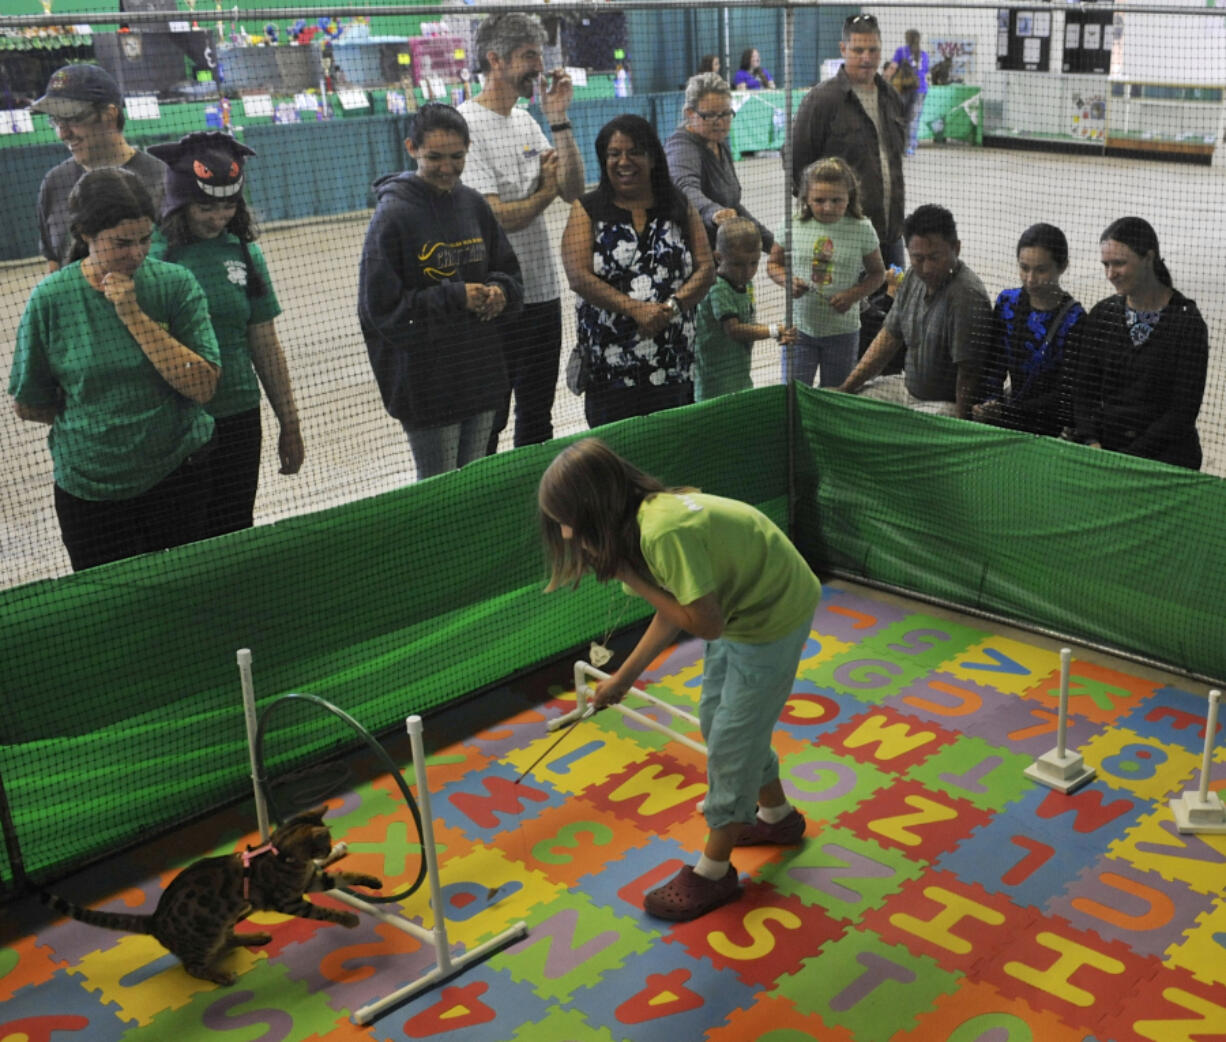 Heather Christenson leads Star through a 4-H cat agility course Sunday at the Clark County Fair. The 10-year-old has a long family history in 4-H. Her great-grandfather showed dairy cows.